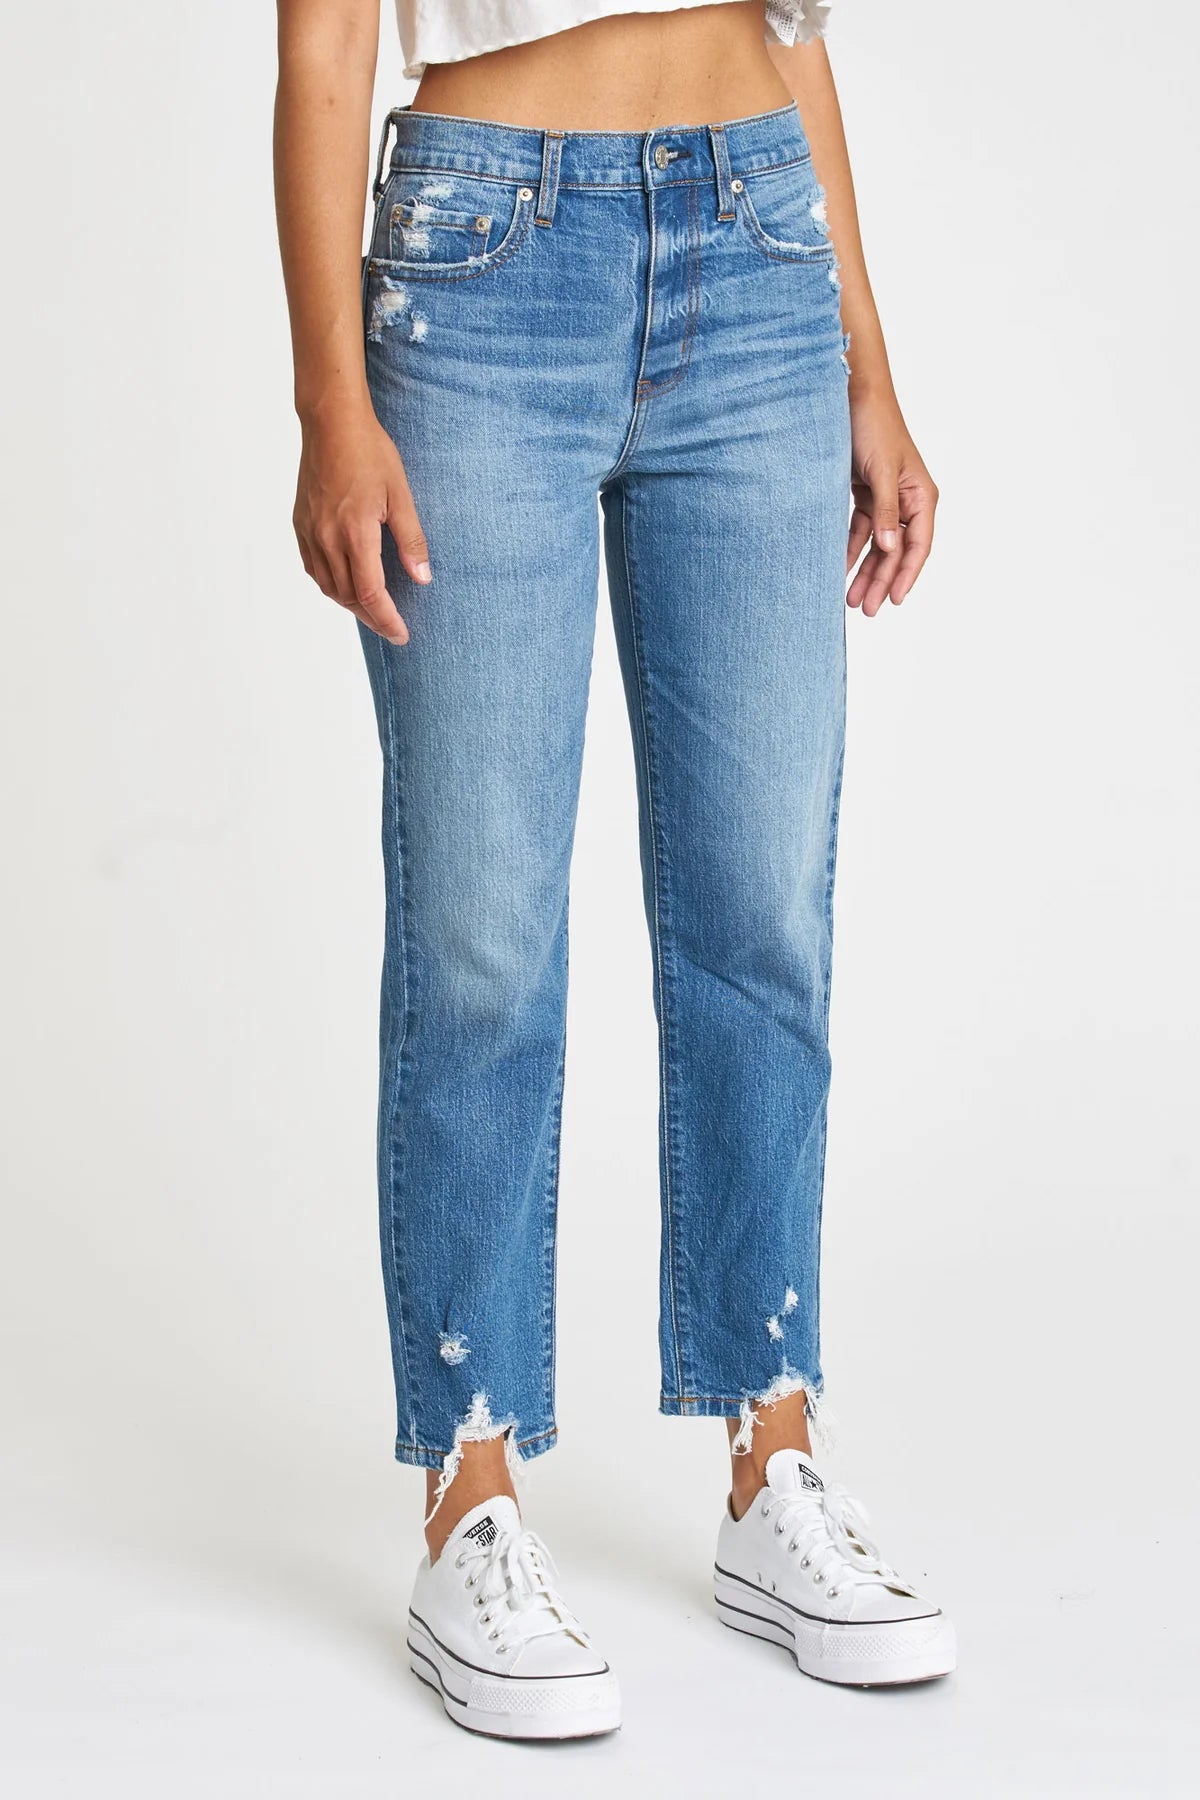 Daze Denim/ The Straight Up- High Rise Straight Ankle